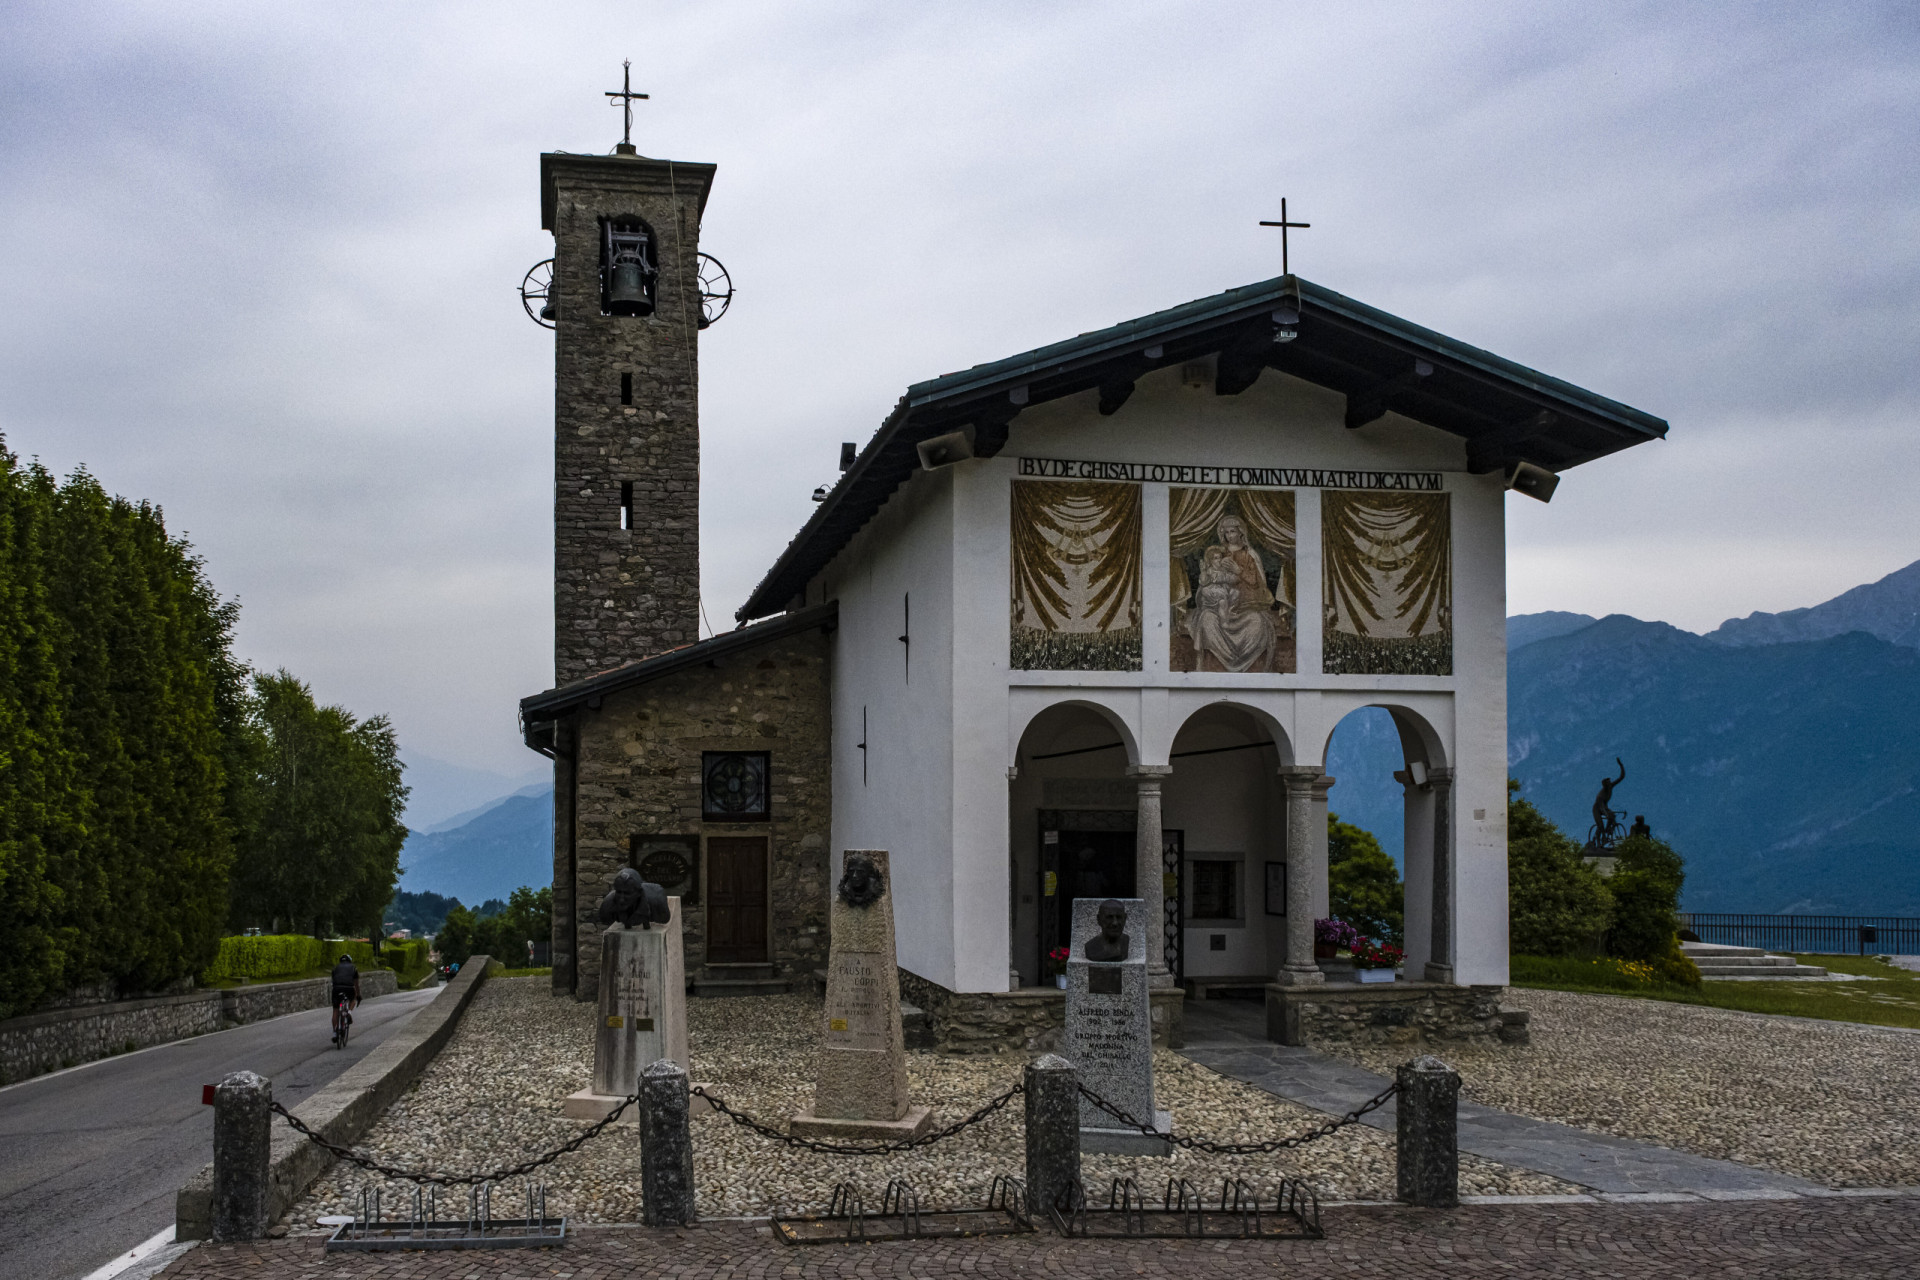 <p>A unique pilgrimage experience, this seven-mile (11-km) journey begins in the town of Bellagio, and ends at the Madonna del Ghisallo Chapel in Lombardy. A renowned cycling hub, it's perfect if you want to go by bike.</p><p><a href="https://www.msn.com/en-us/community/channel/vid-7xx8mnucu55yw63we9va2gwr7uihbxwc68fxqp25x6tg4ftibpra?cvid=94631541bc0f4f89bfd59158d696ad7e">Follow us and access great exclusive content every day</a></p>